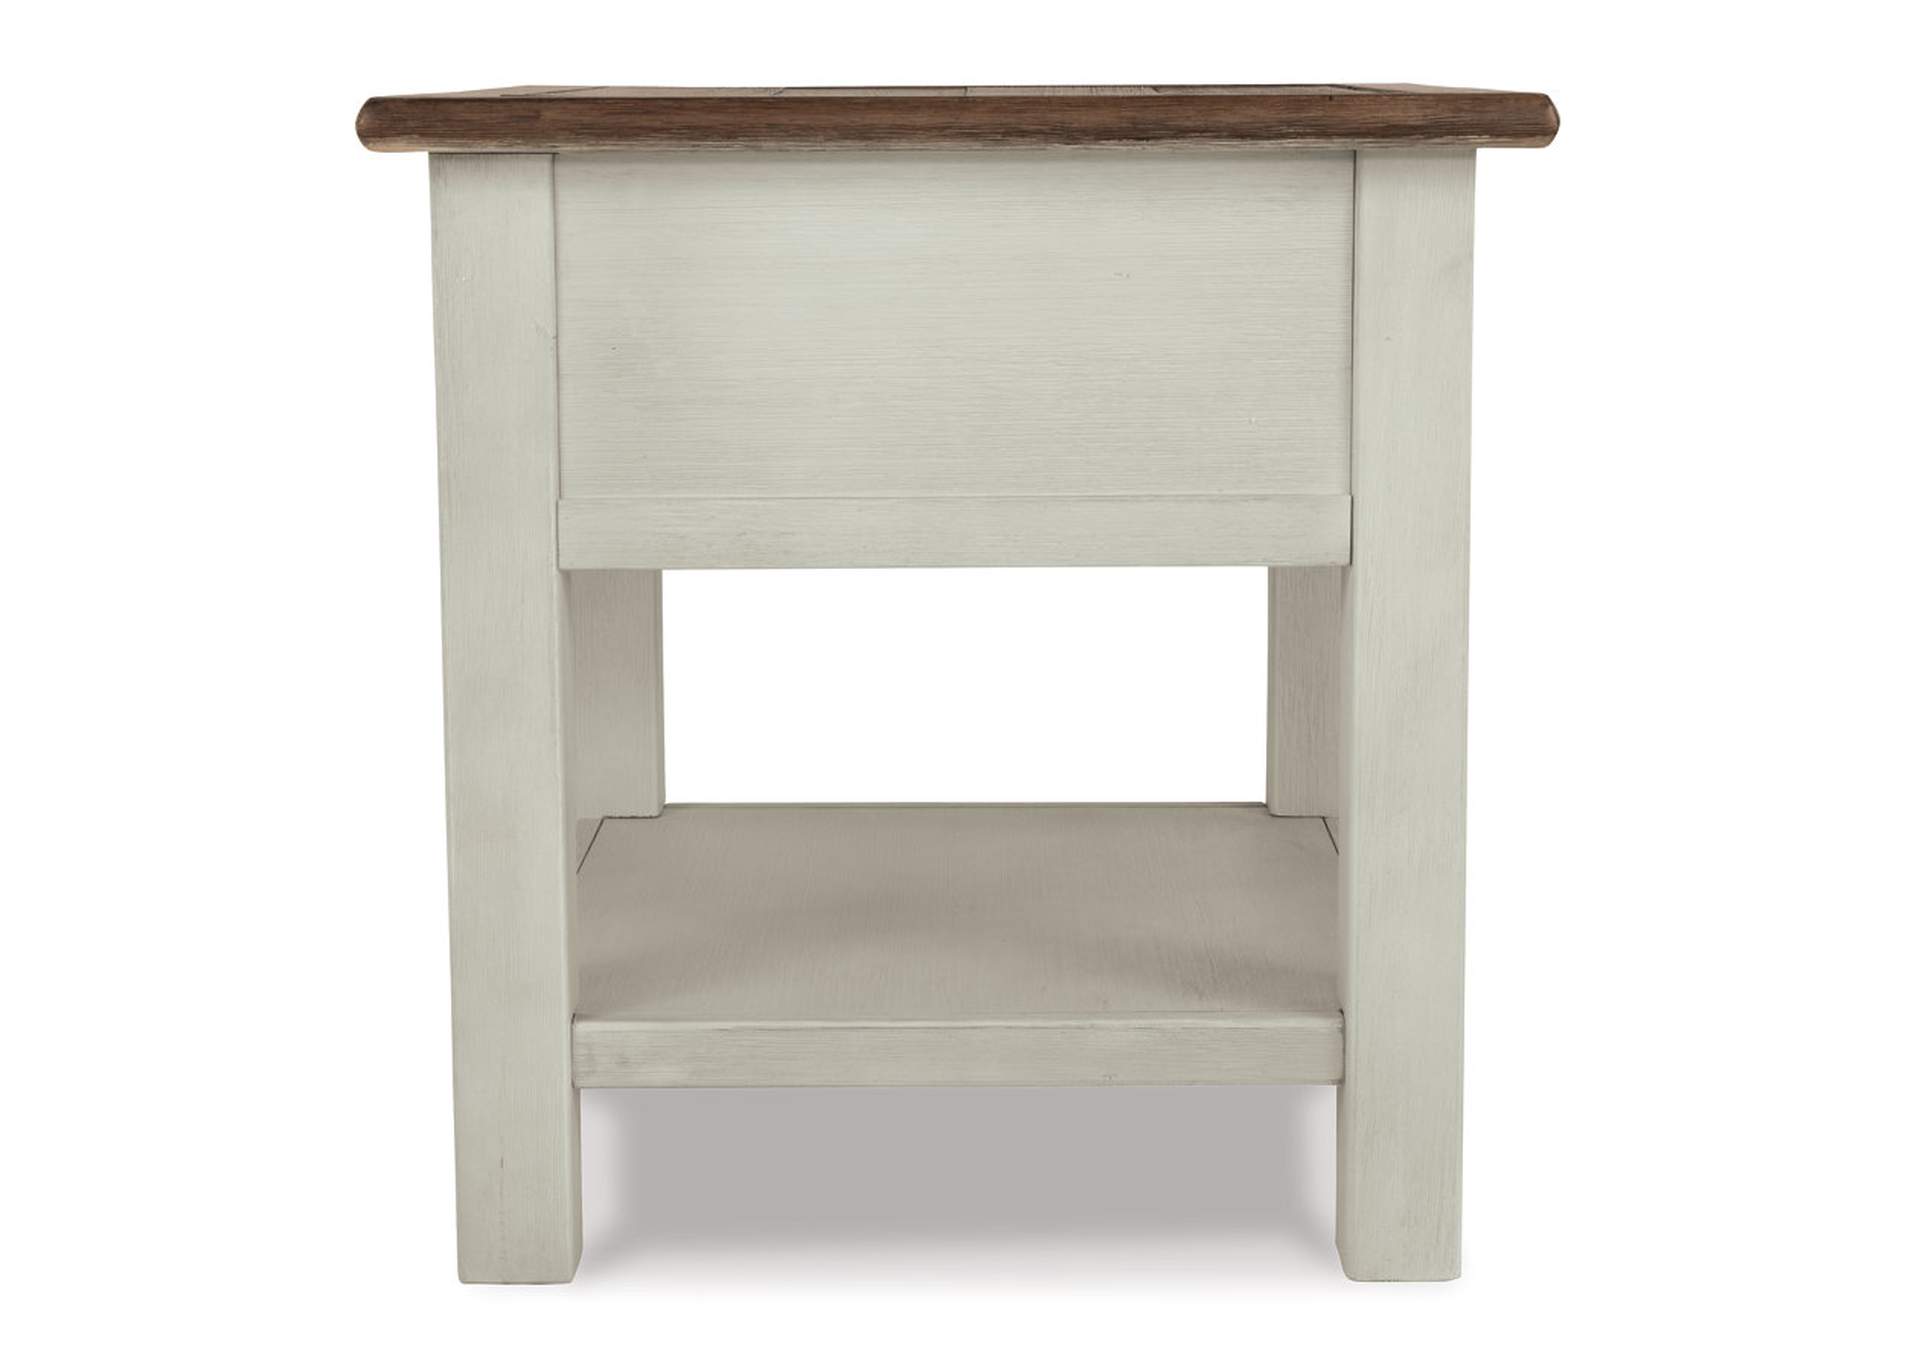 Bolanburg Chairside End Table with USB Ports & Outlets,Signature Design By Ashley